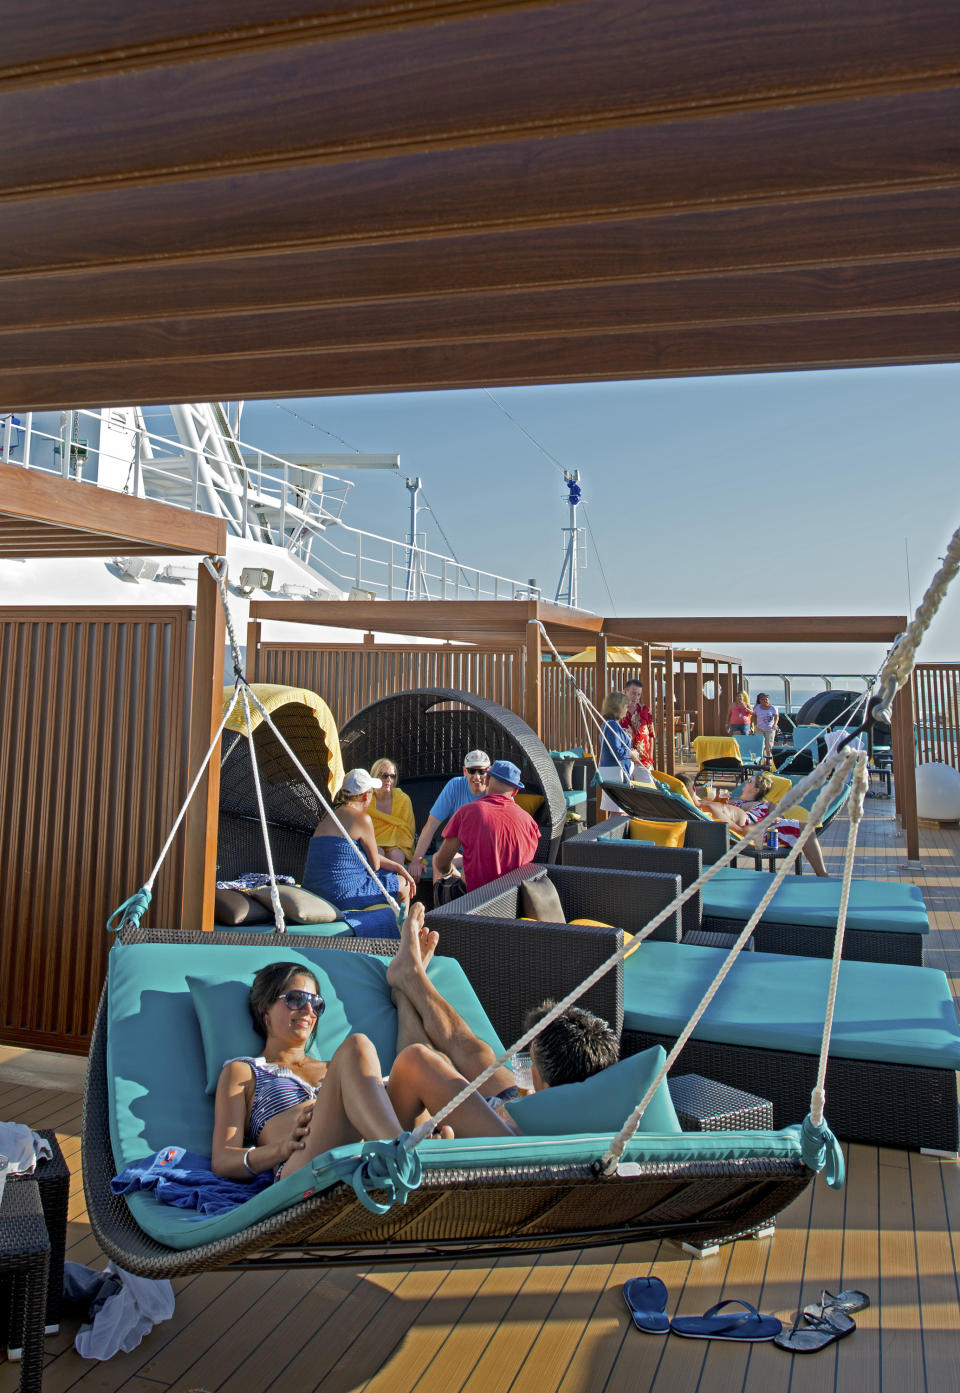 In this June 17, 2012 photo provided by Carnival Cruise Lines, vacationers aboard the Carnival Breeze relax at Serenity, an adults-only area offering plush chaise lounges and chairs, whirlpools, and a dining area with salads, wraps and other light fare. Multi-generational groups are a growing segment of cruise passengers. To accommodate the diverse needs of old and young passengers, ships are expanding areas for youth activities while at the same time creating more adult-only pools and quiet areas where adult passengers can nap, sun, or read a book. Carnival ships call these areas “Serenity Spaces.” (AP Photo/Carnival Cruise Lines, Andy Newman)